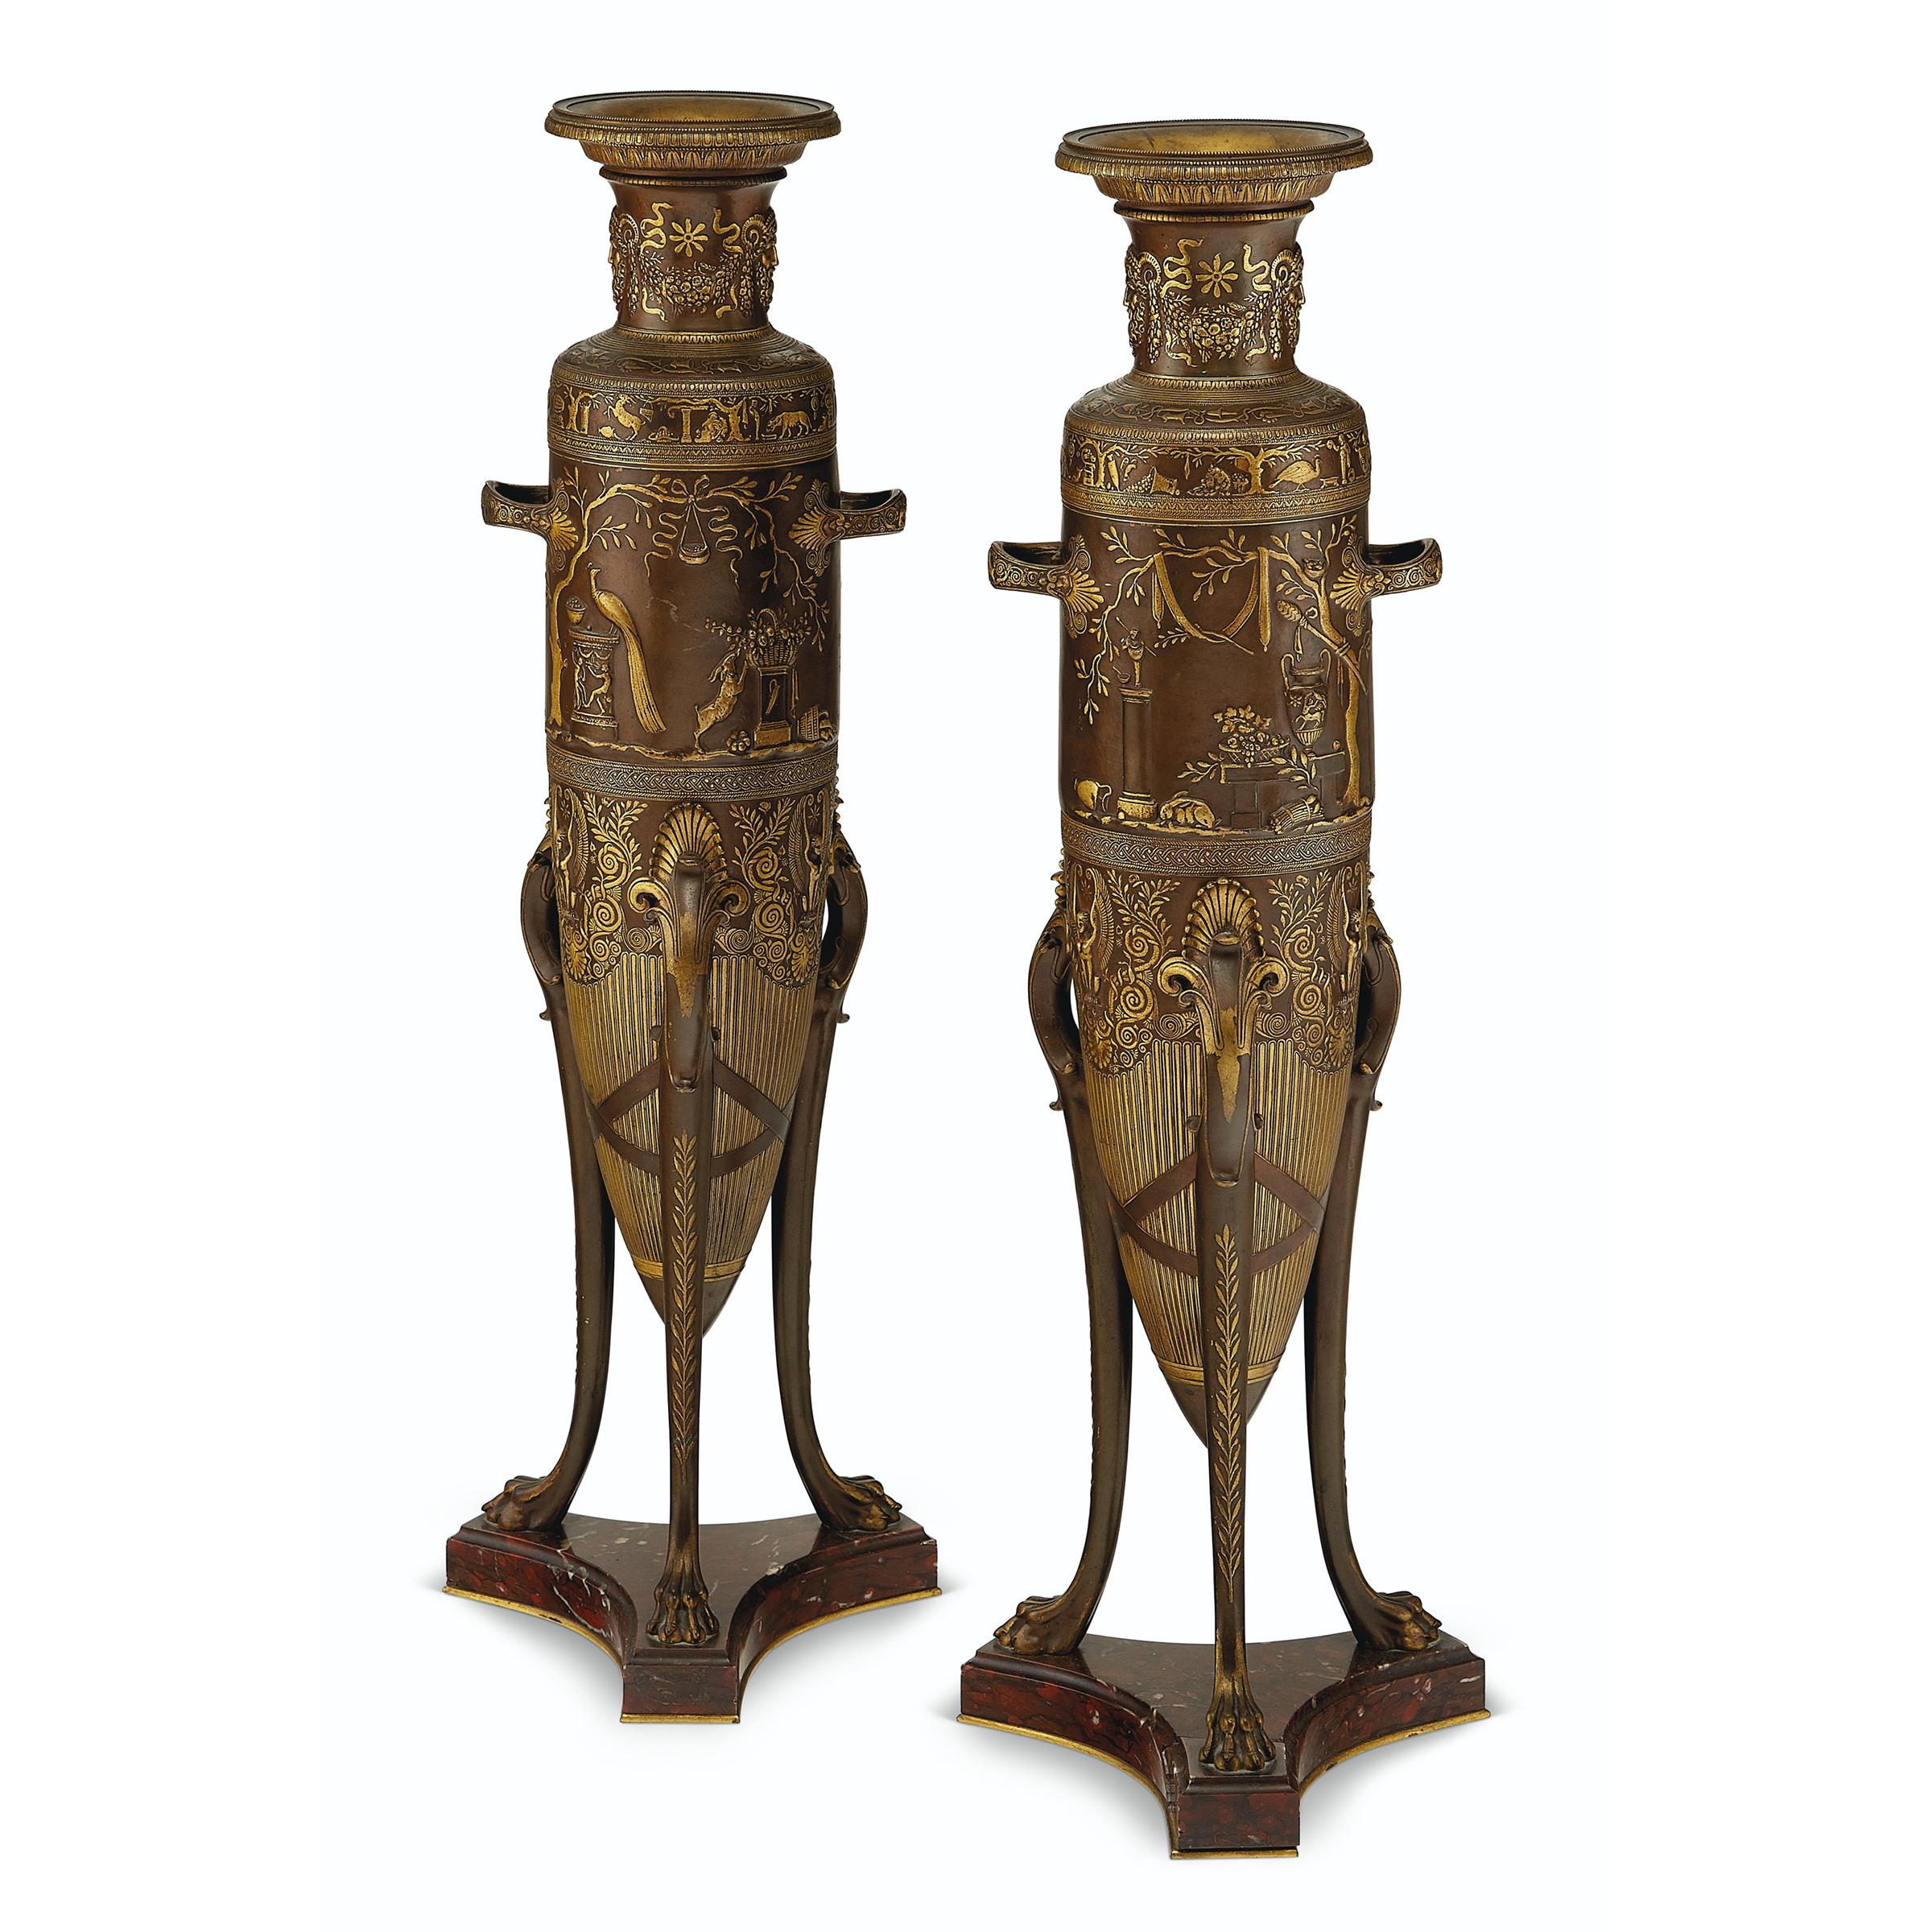 Fine pair of parcel-gilt and patinated bronze neo-grec bronze vases and rouge griotte marble. Designed by Ferdinand Levillain, cast by Ferdinand Barbedienne. Signed 'F. LEVILLAIN' , with foundry inscription 'F. BARBEDIENNE'

Origin: French
Date: